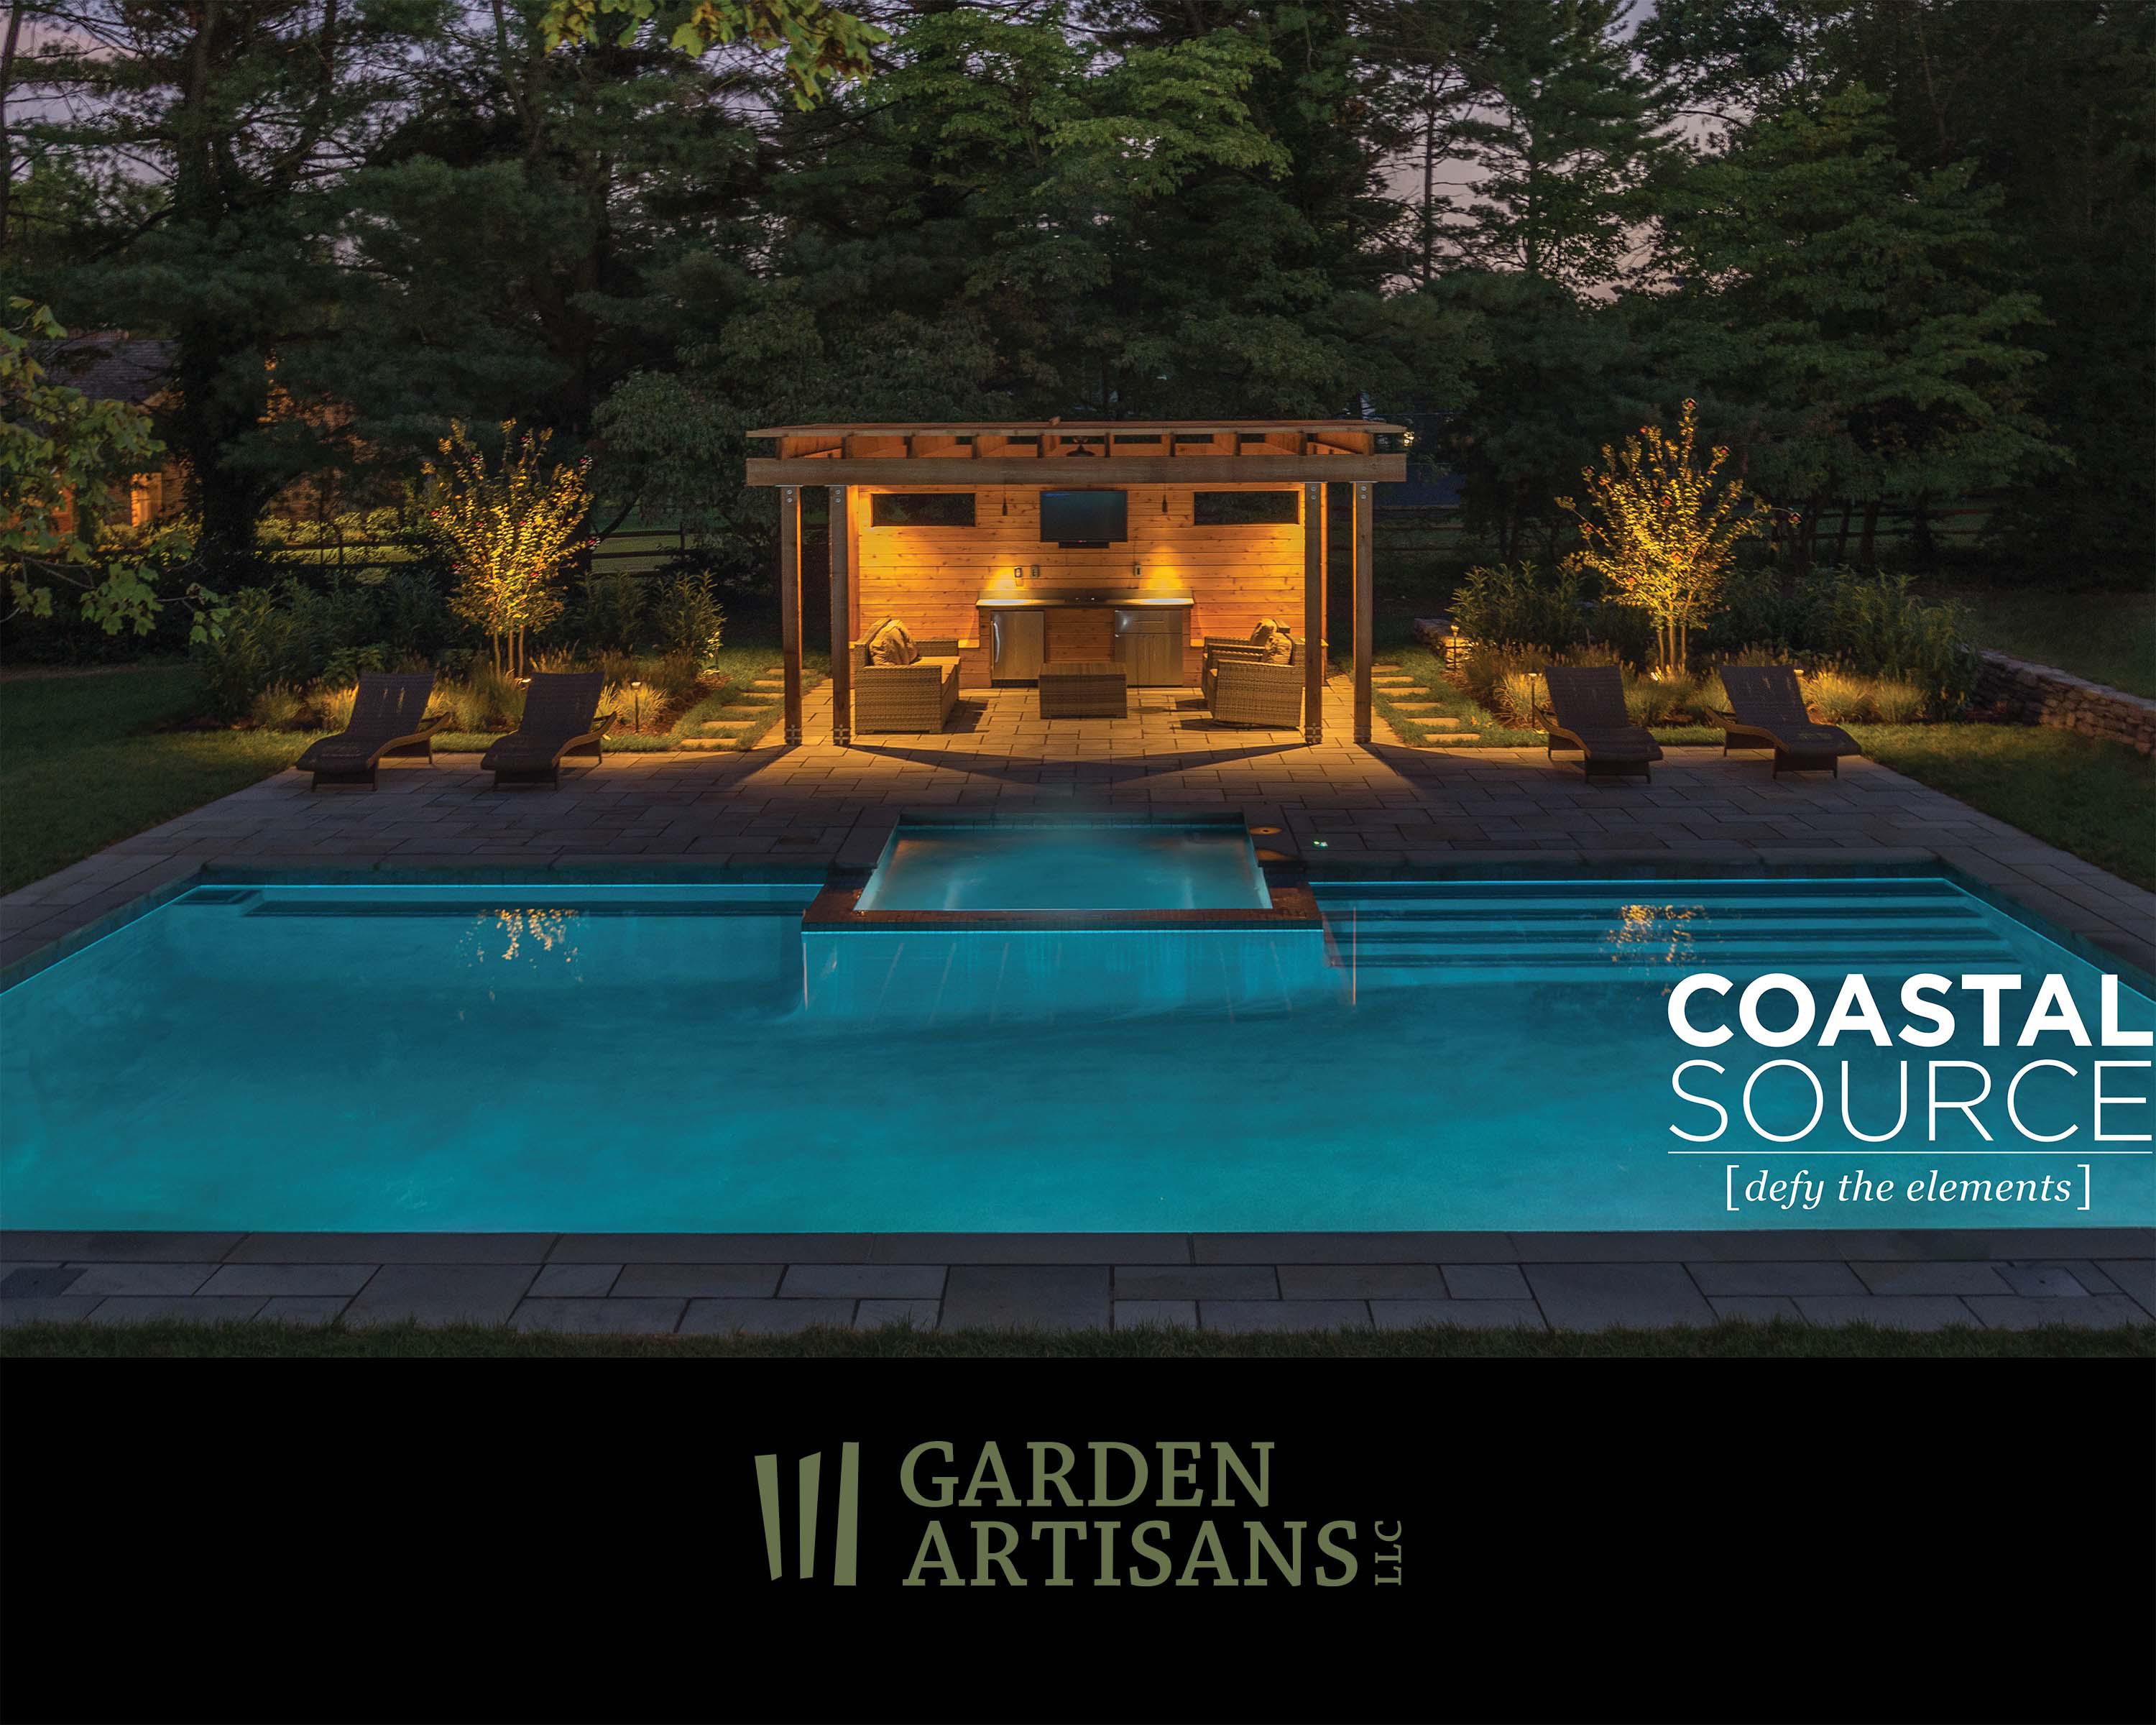 Garden Artisans is an authorized dealer of Coastal Source outdoor lighting and audio products! Learn how we can design and install outdoor lighting and sound for your outdoor living environment! 609-371-0099 609-647-0666 www.gardenartisansllc.com